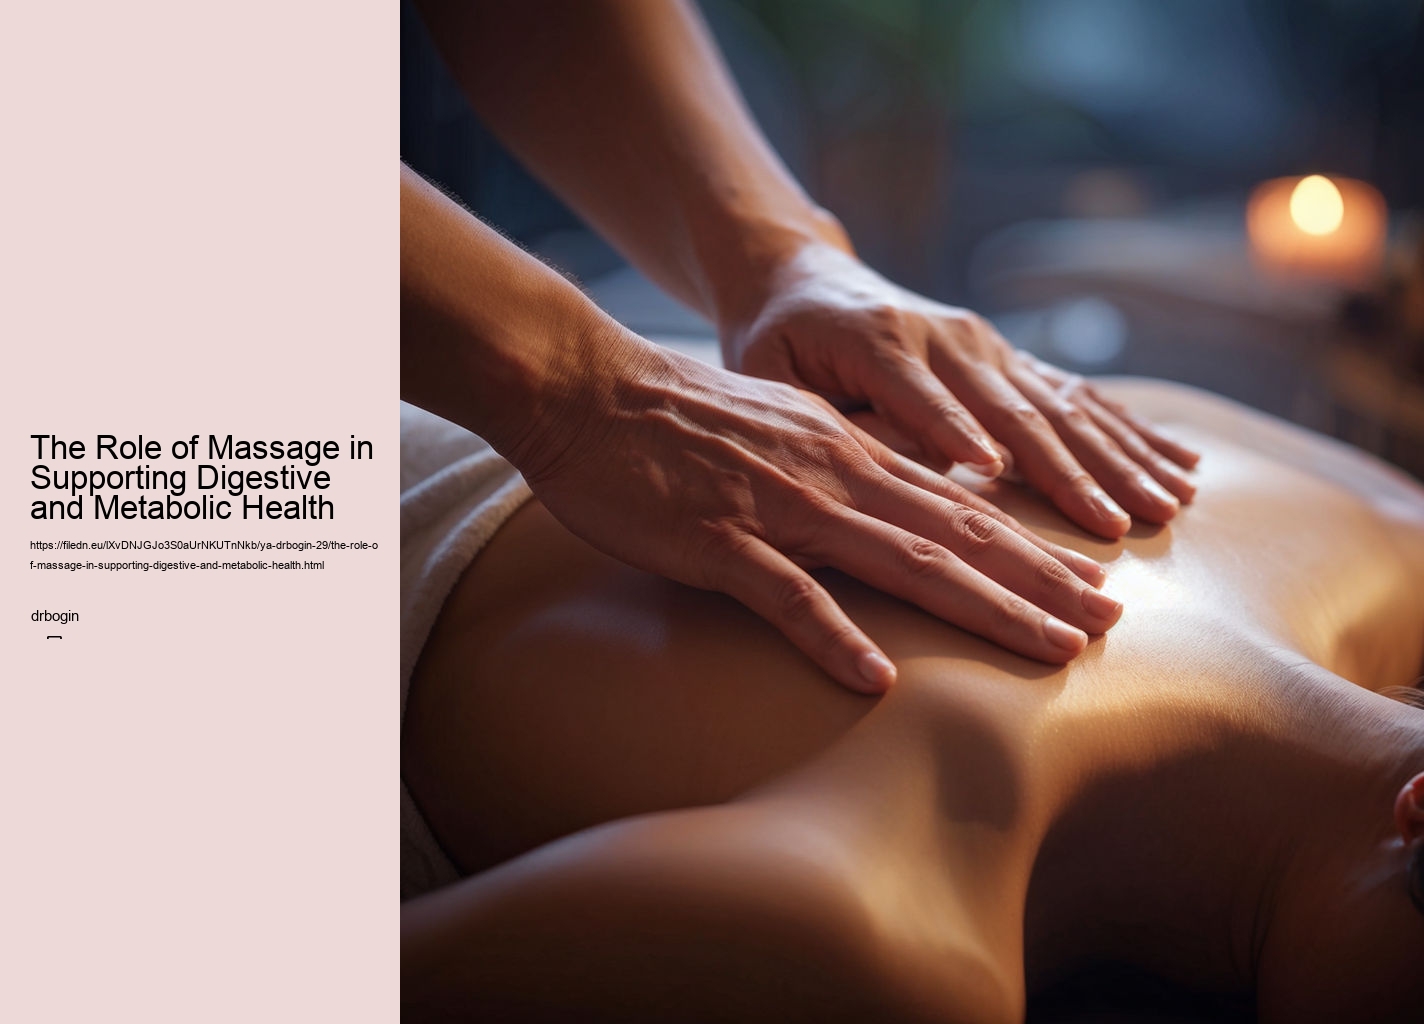 The Role of Massage in Supporting Digestive and Metabolic Health